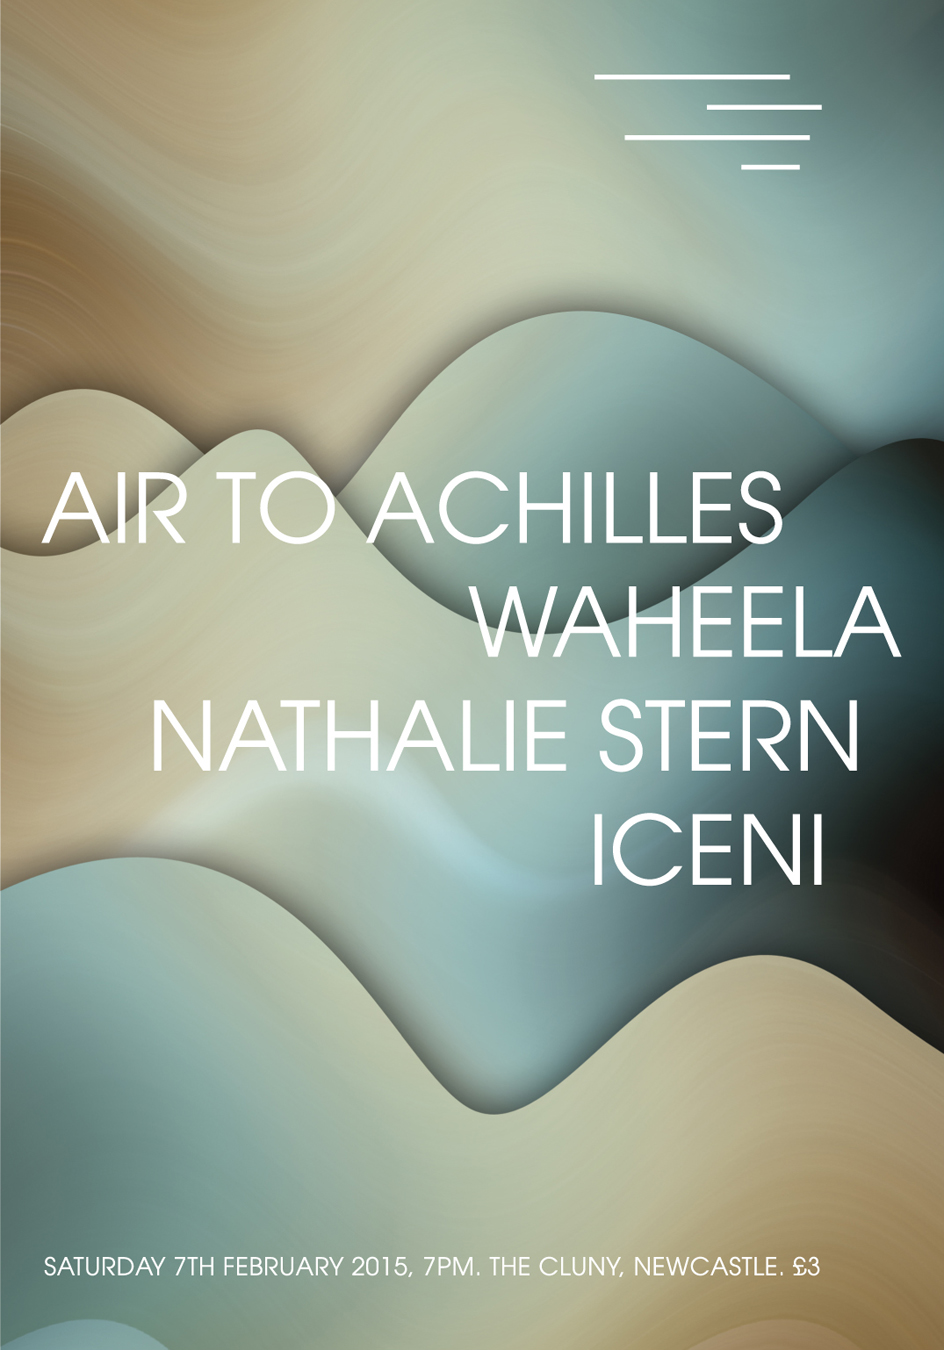 Poster design for Newcastle band Air To Achilles.